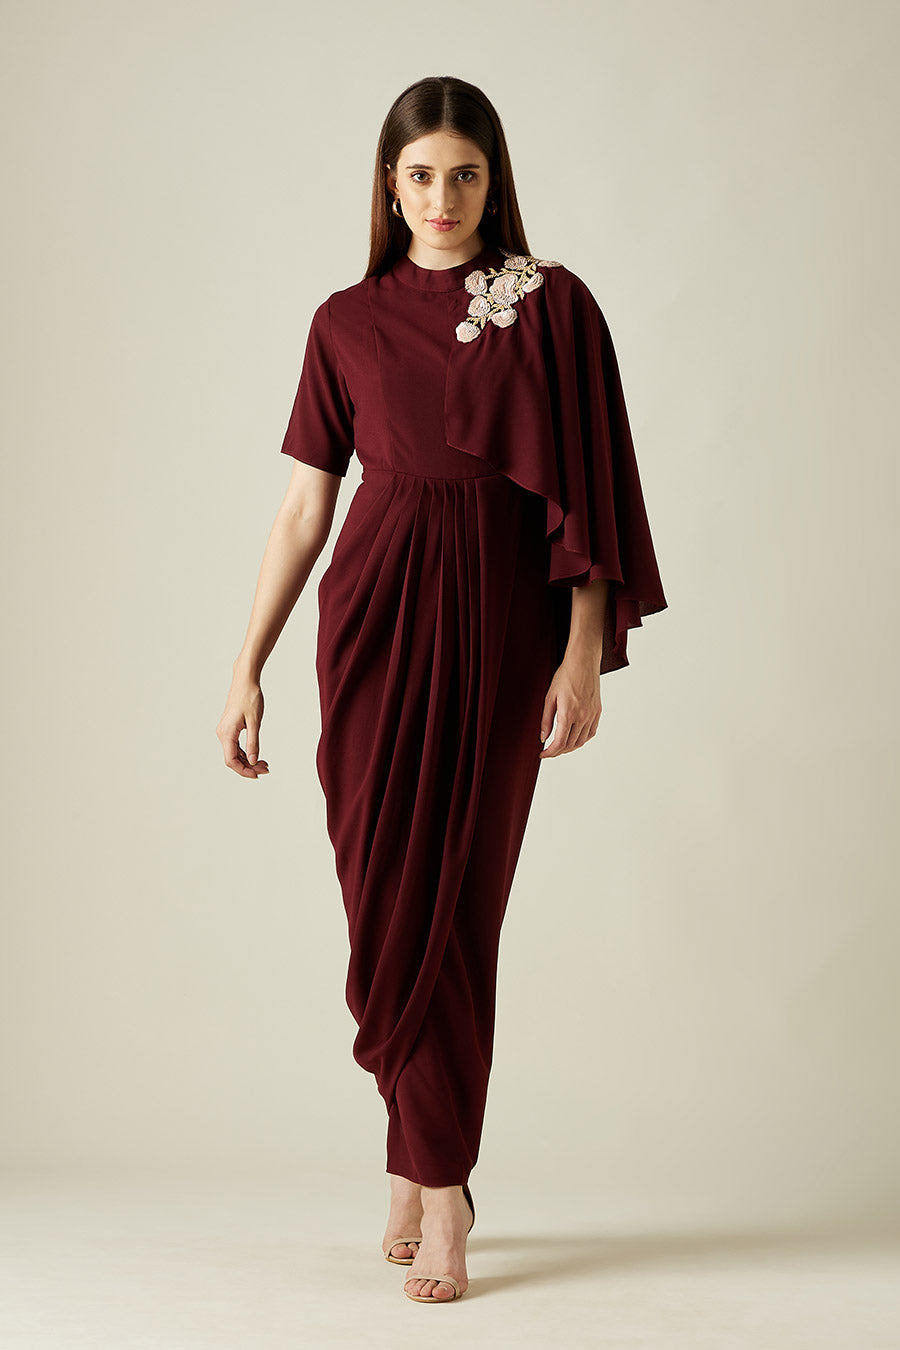 Wine Floral Embroidered Drape Dress